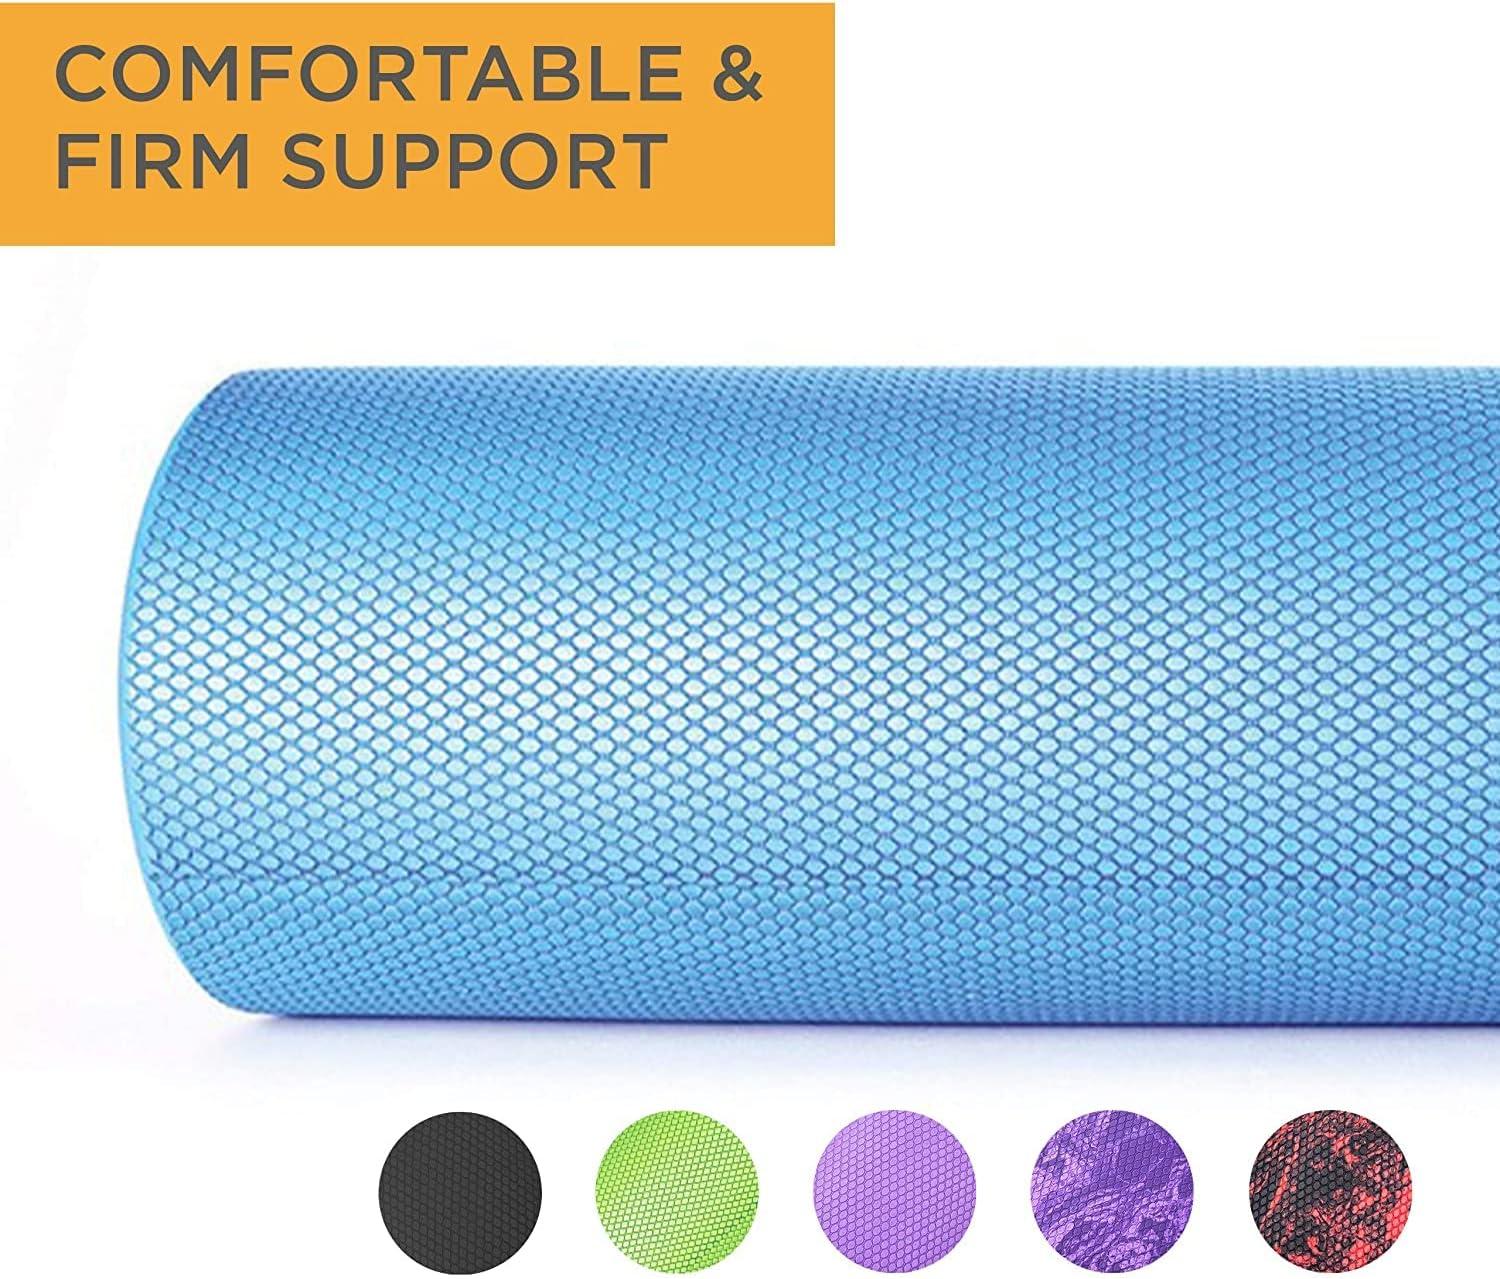 Maximo Fitness Foam Roller– 36 x 6 Exercise Rollers for Trigger Point  Self Massage & Muscle Tension Relief, Massager for Back, Fitness, Physical